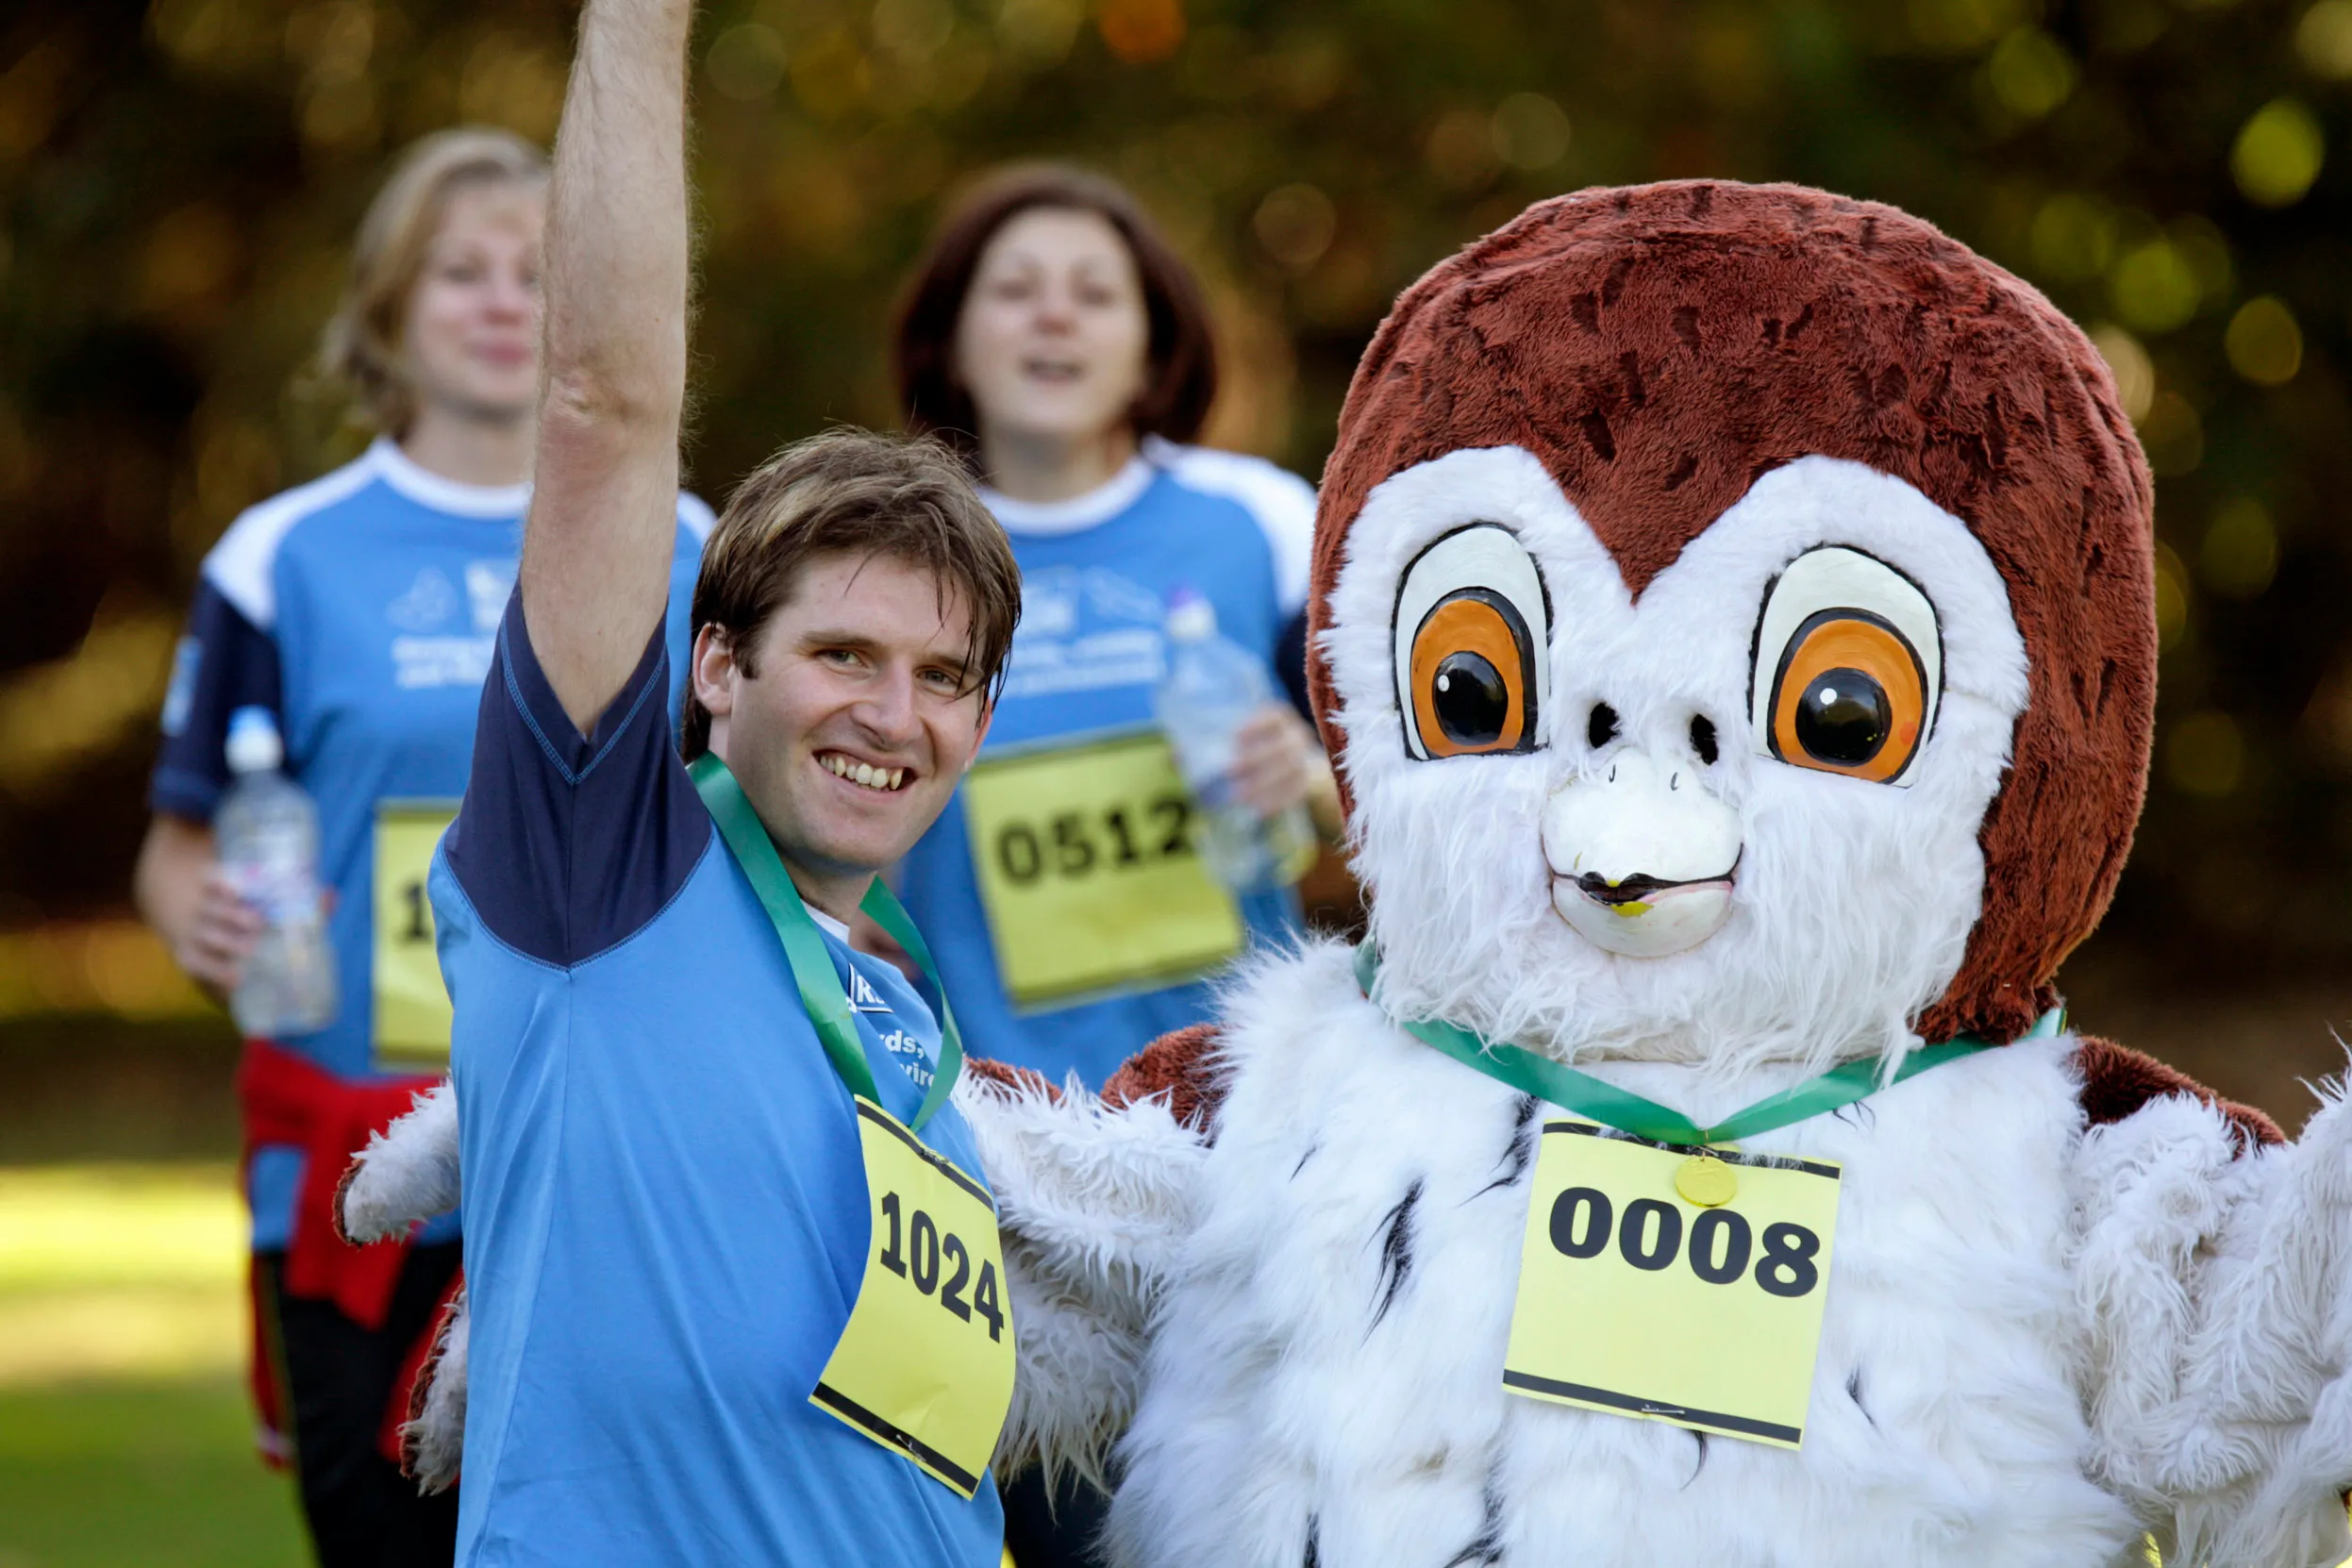 A group of people in blue t-shirts fundraising, doing a fun run with someone dressed as an owl.